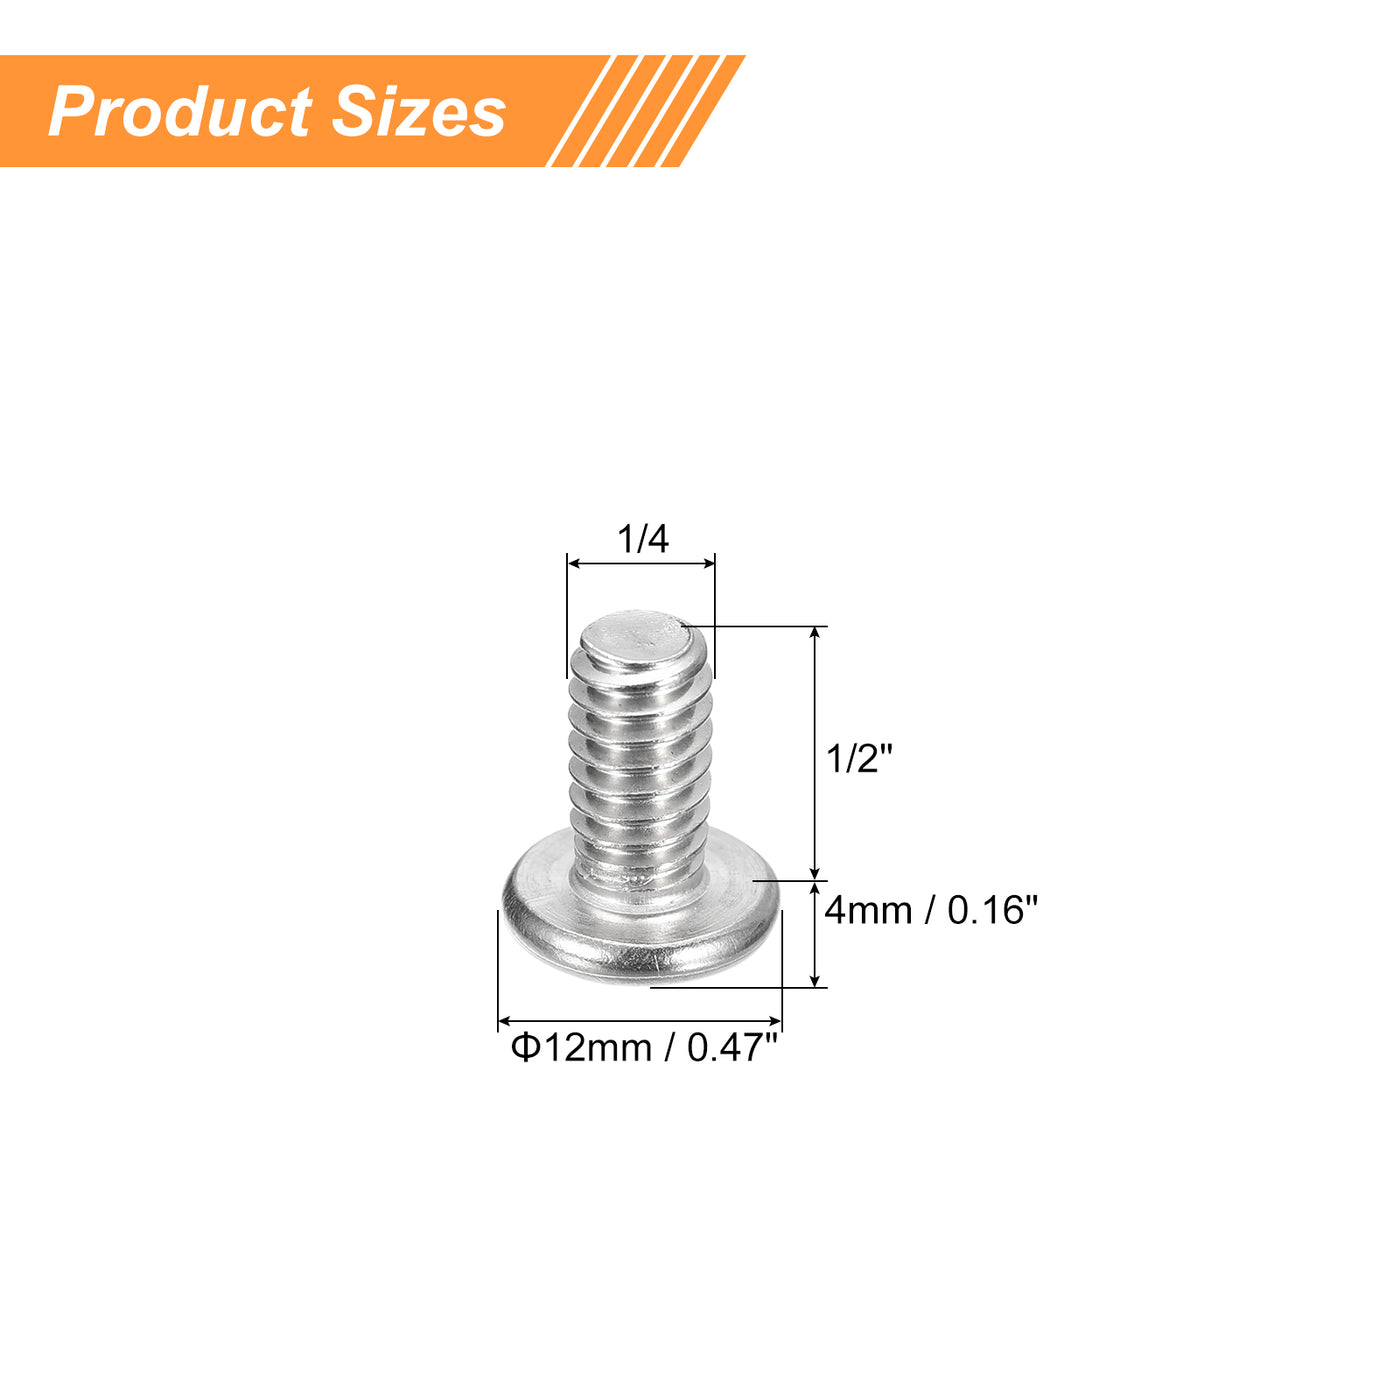 uxcell Uxcell 1/4-20x1/2" Pan Head Machine Screws, Stainless Steel 18-8 Screw, Pack of 50